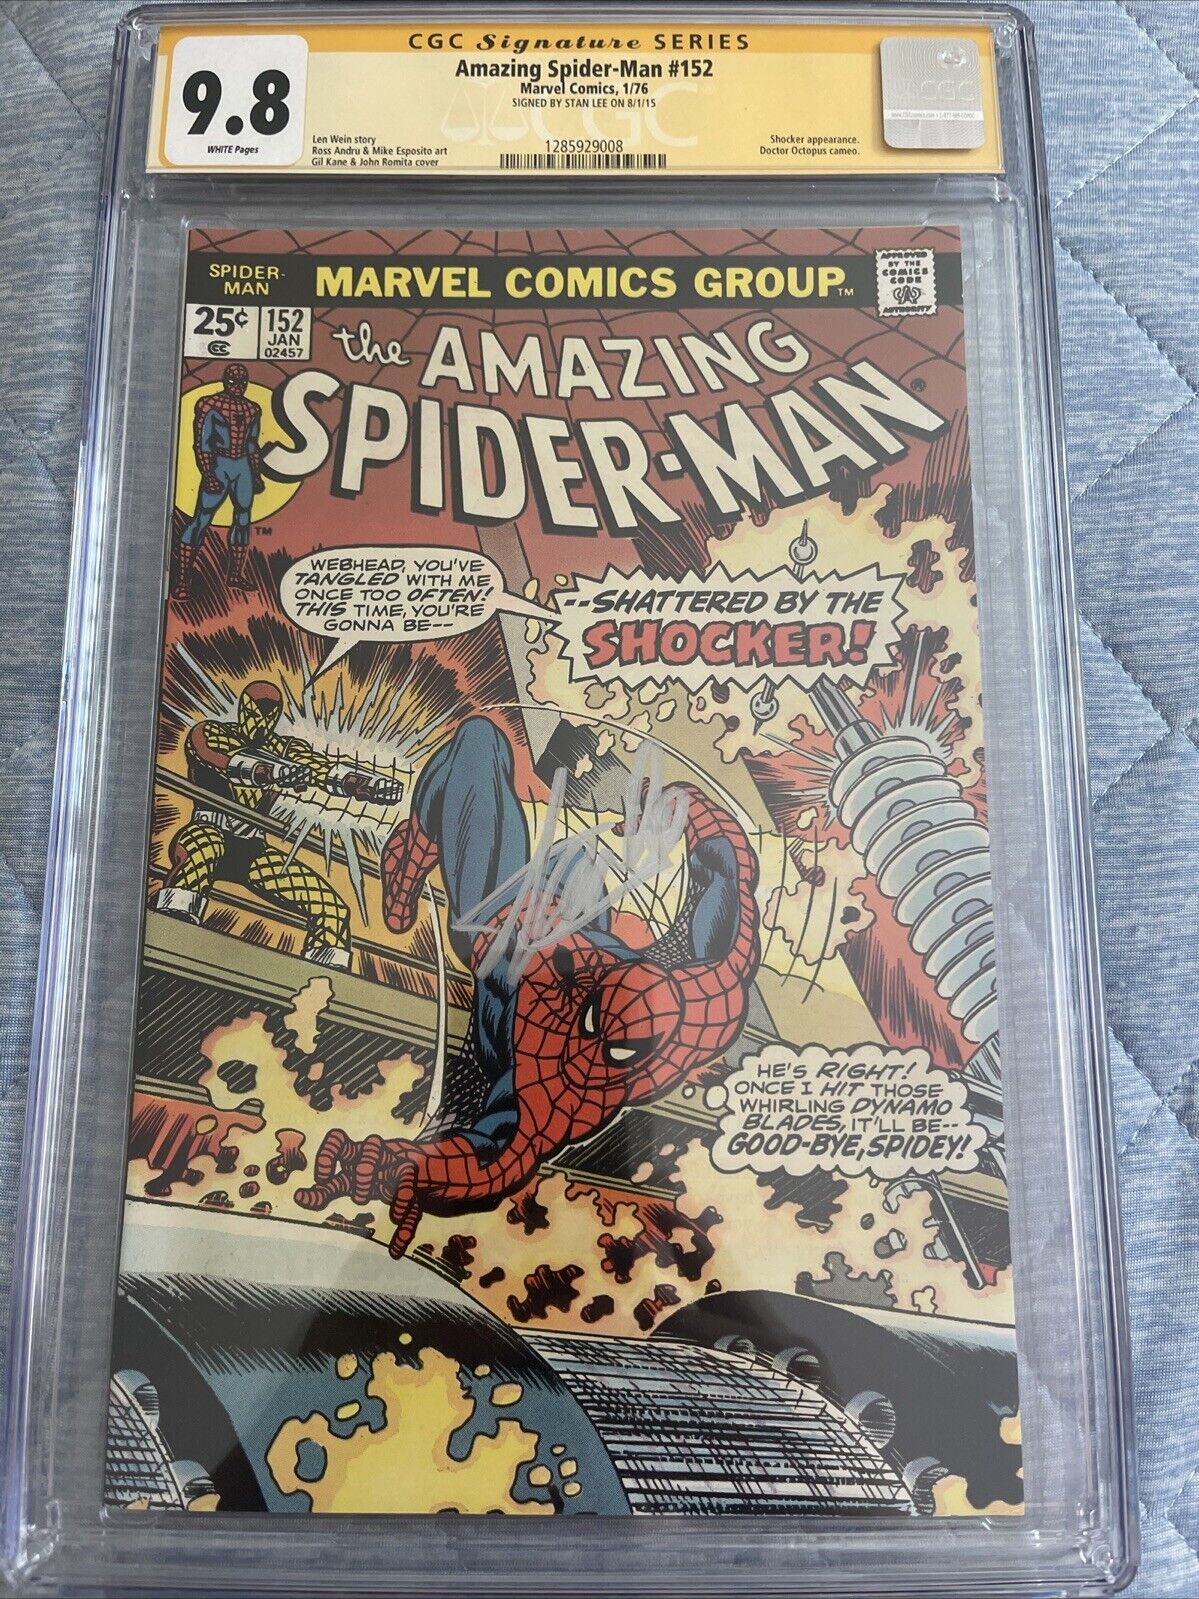 Amazing Spider-Man #152 CGC 9.8 SIGNED BY STAN LEE